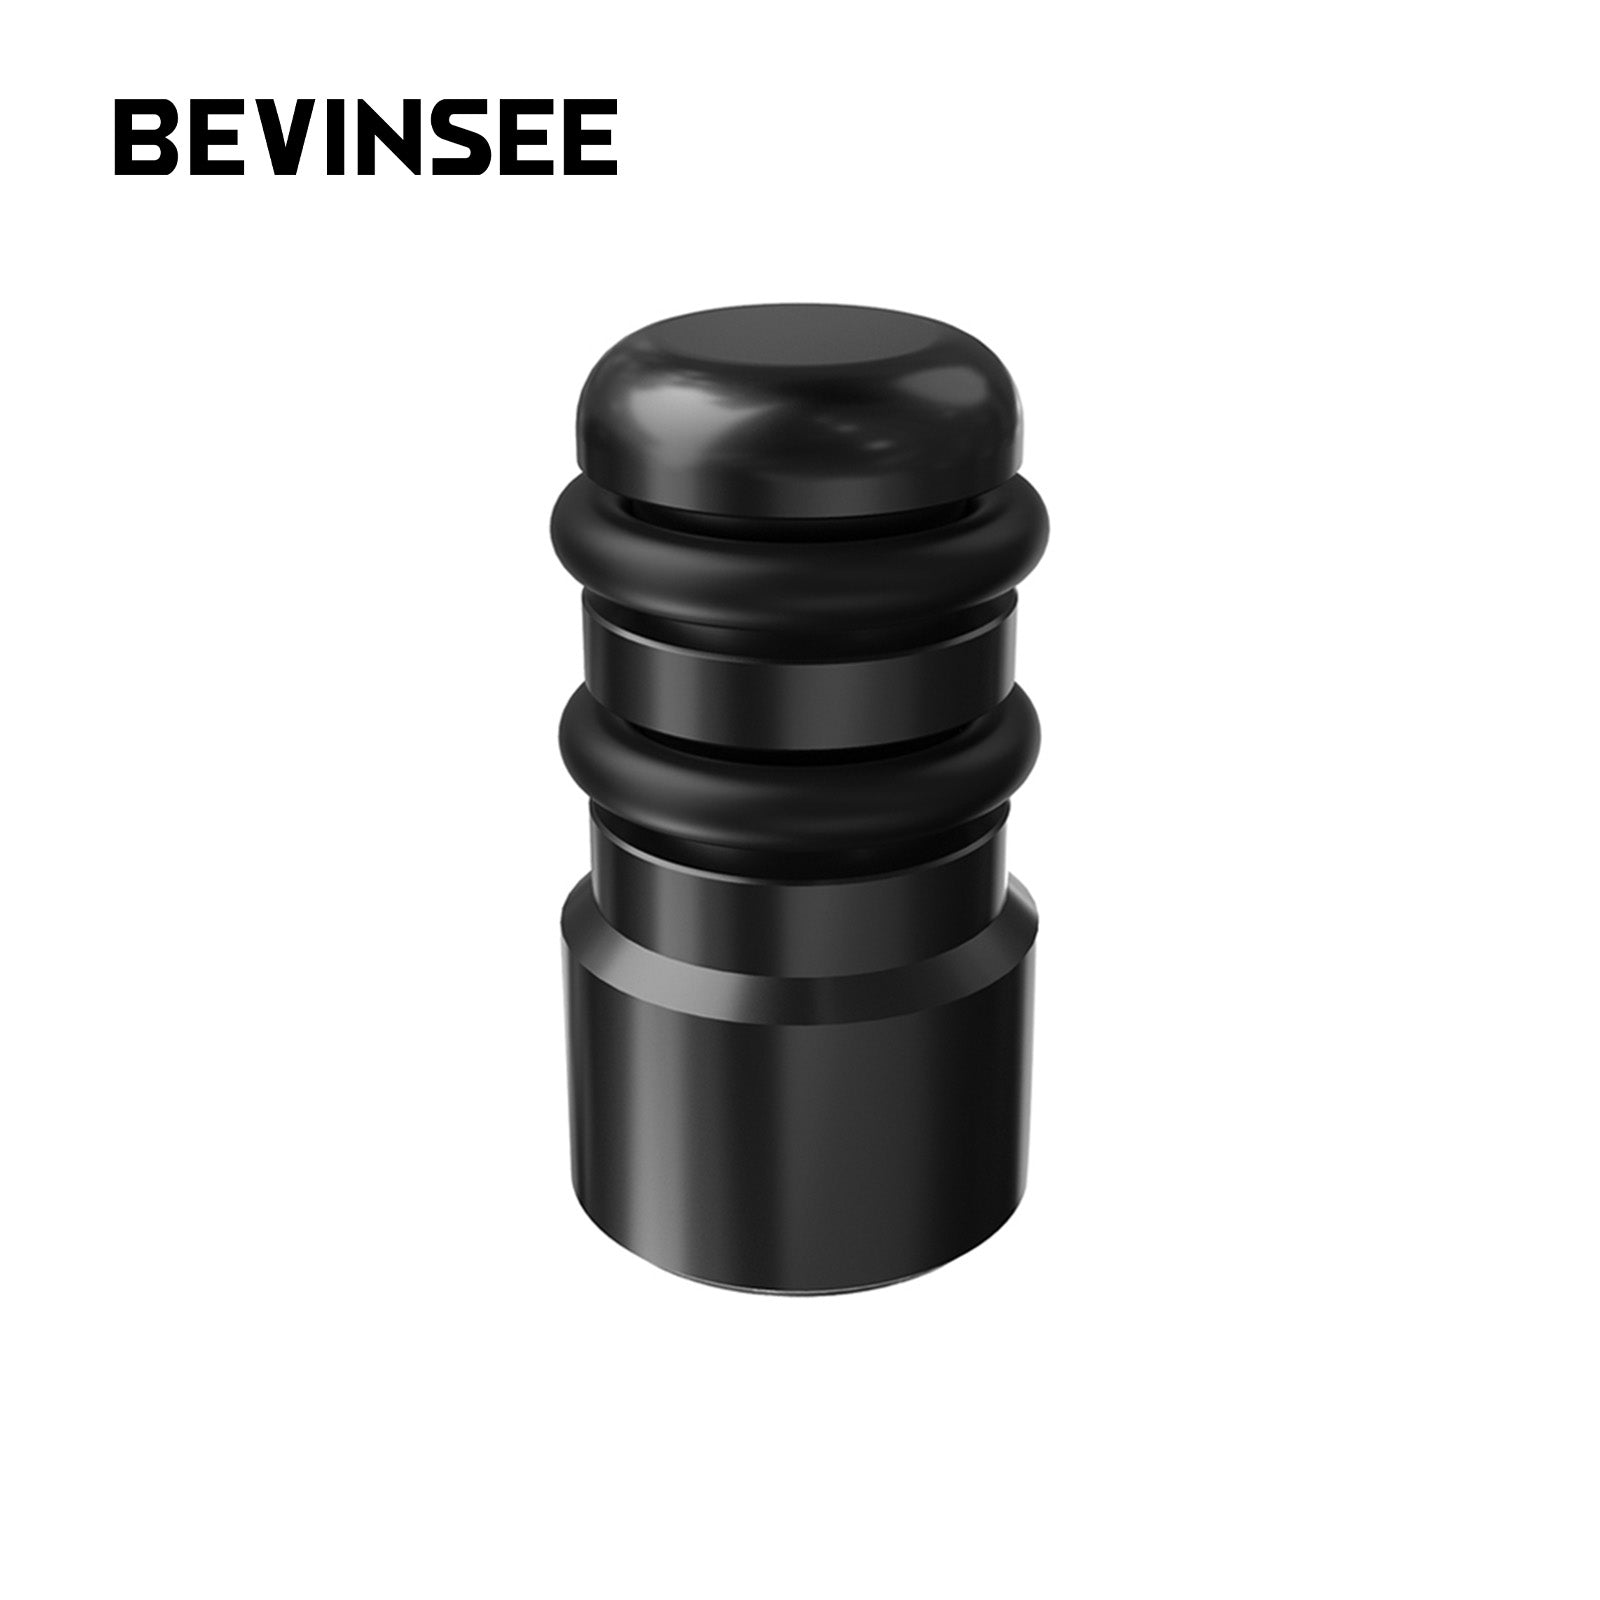 BEVINSEE LT LS Engine Oil Dipstick Tube Plug for GMC Cadillac Chevy Pontiac